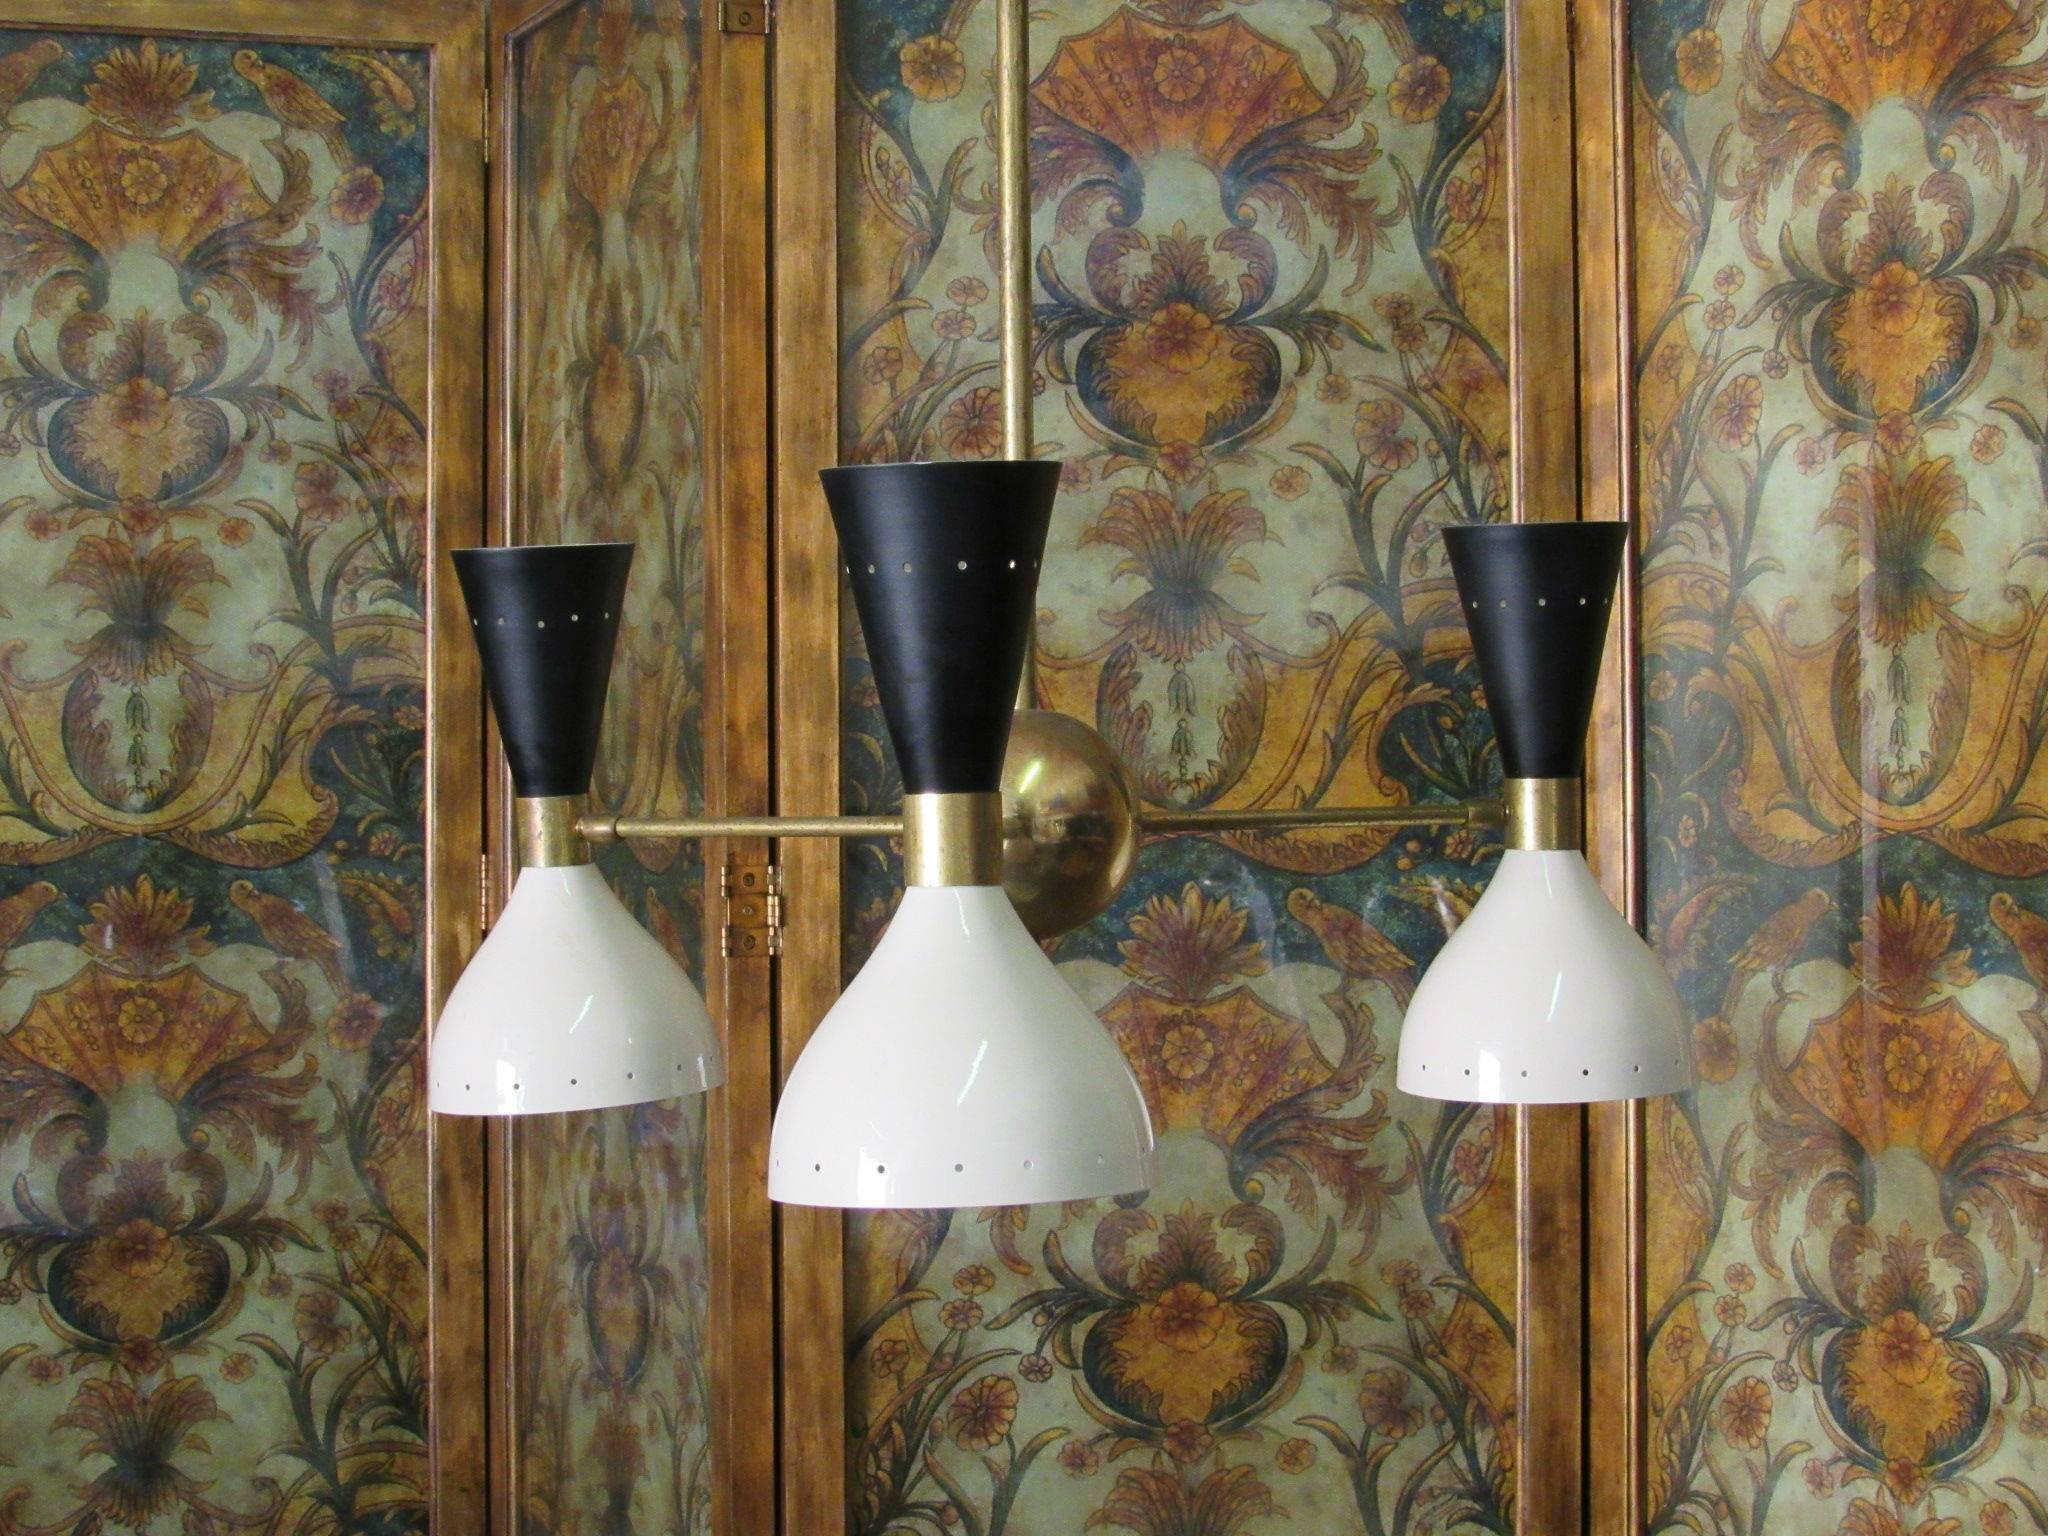 Three-arm articulating Italian ceiling light with brass centre globe and three black and white perforated shades. The shades have been repainted and restored, all new sockets and rewiring. Ready to be installed. 

Shades: Each shade is